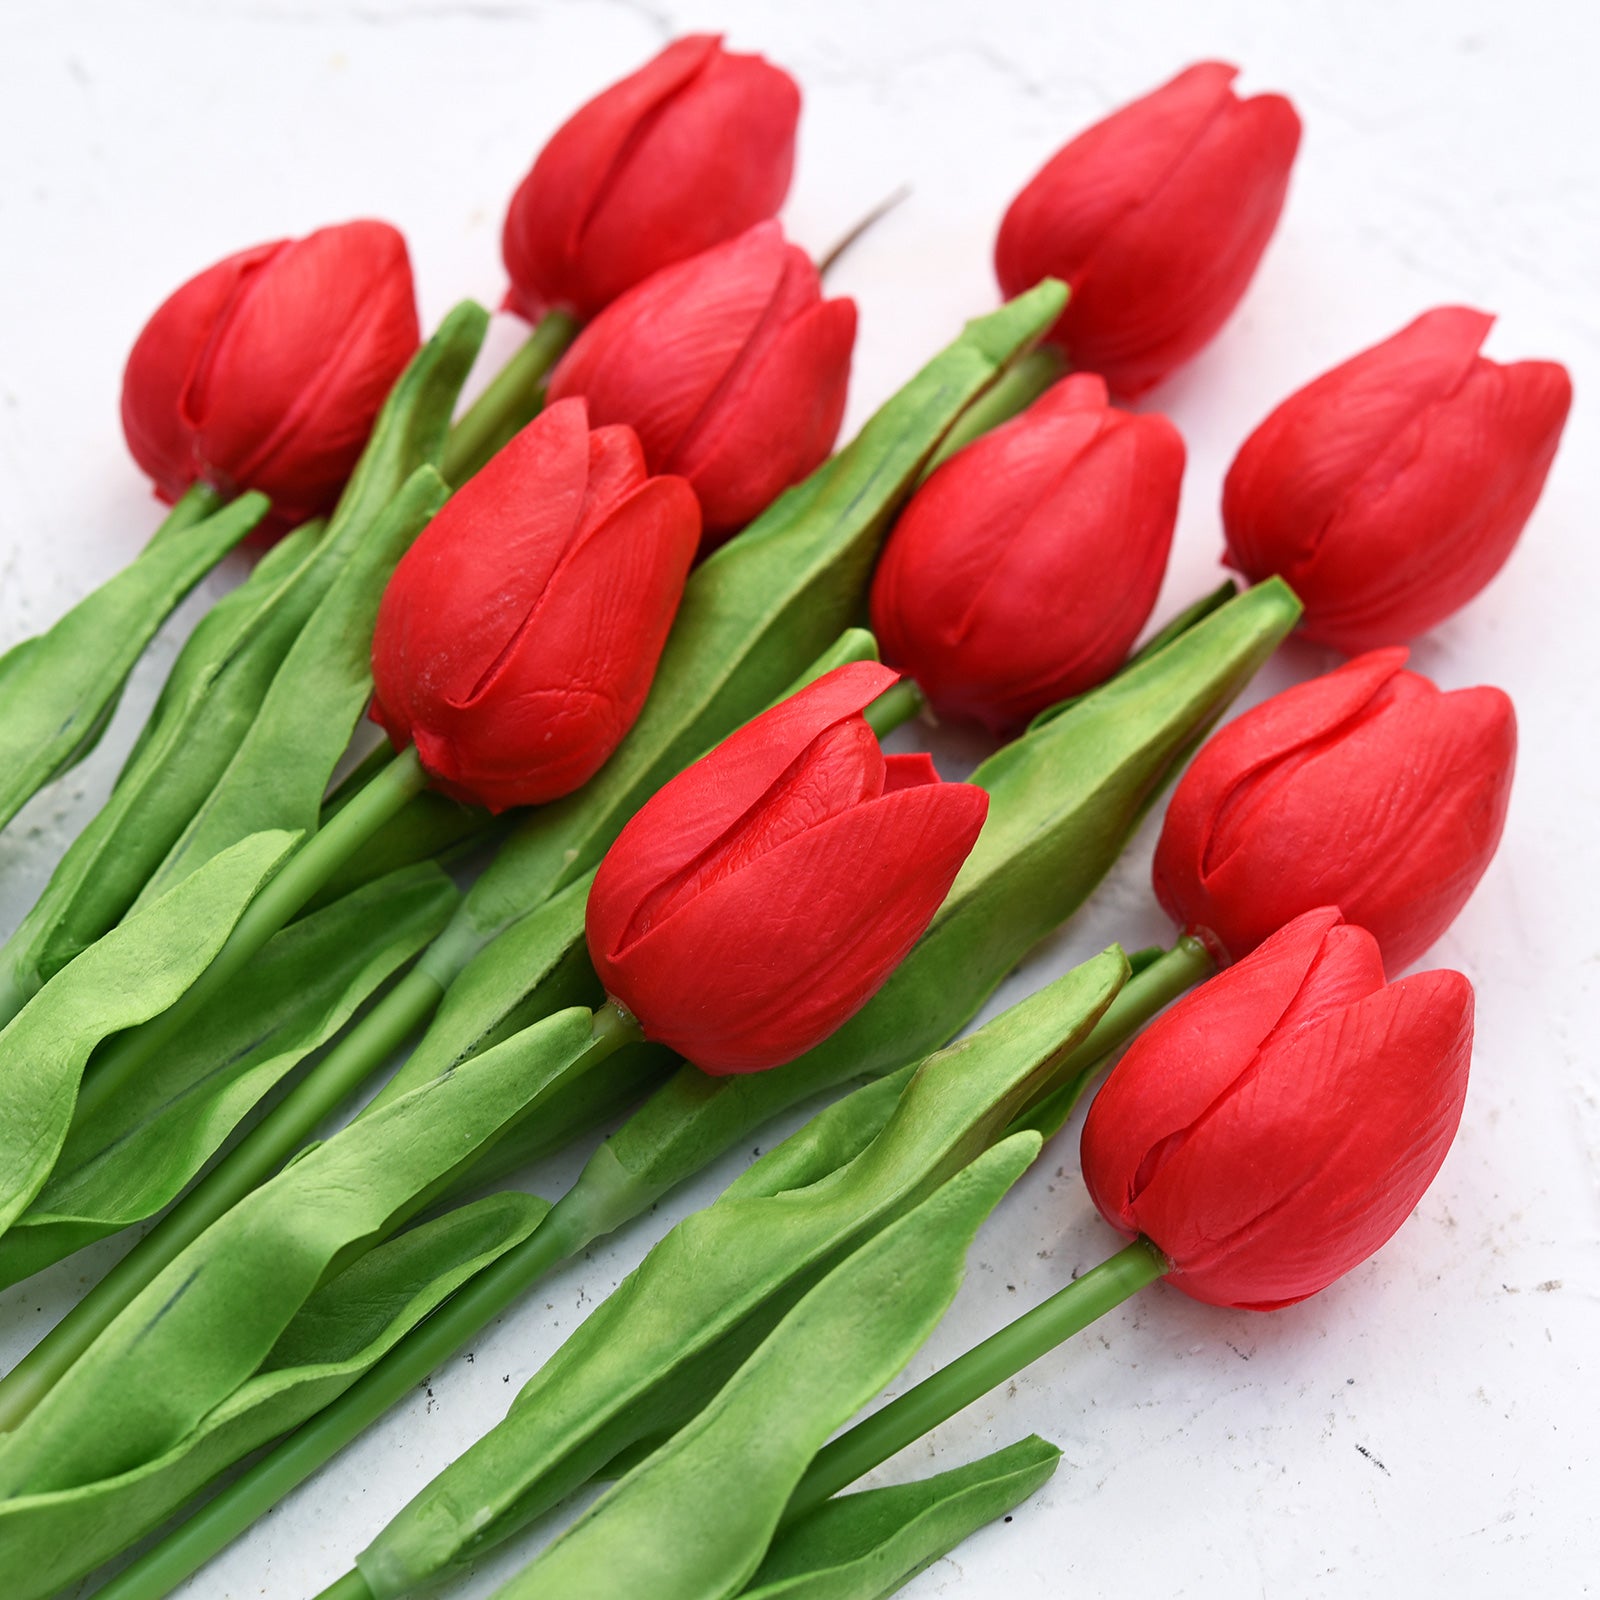 Vivid Red Real Touch Tulips Artificial Flowers Bouquet 10 Stems